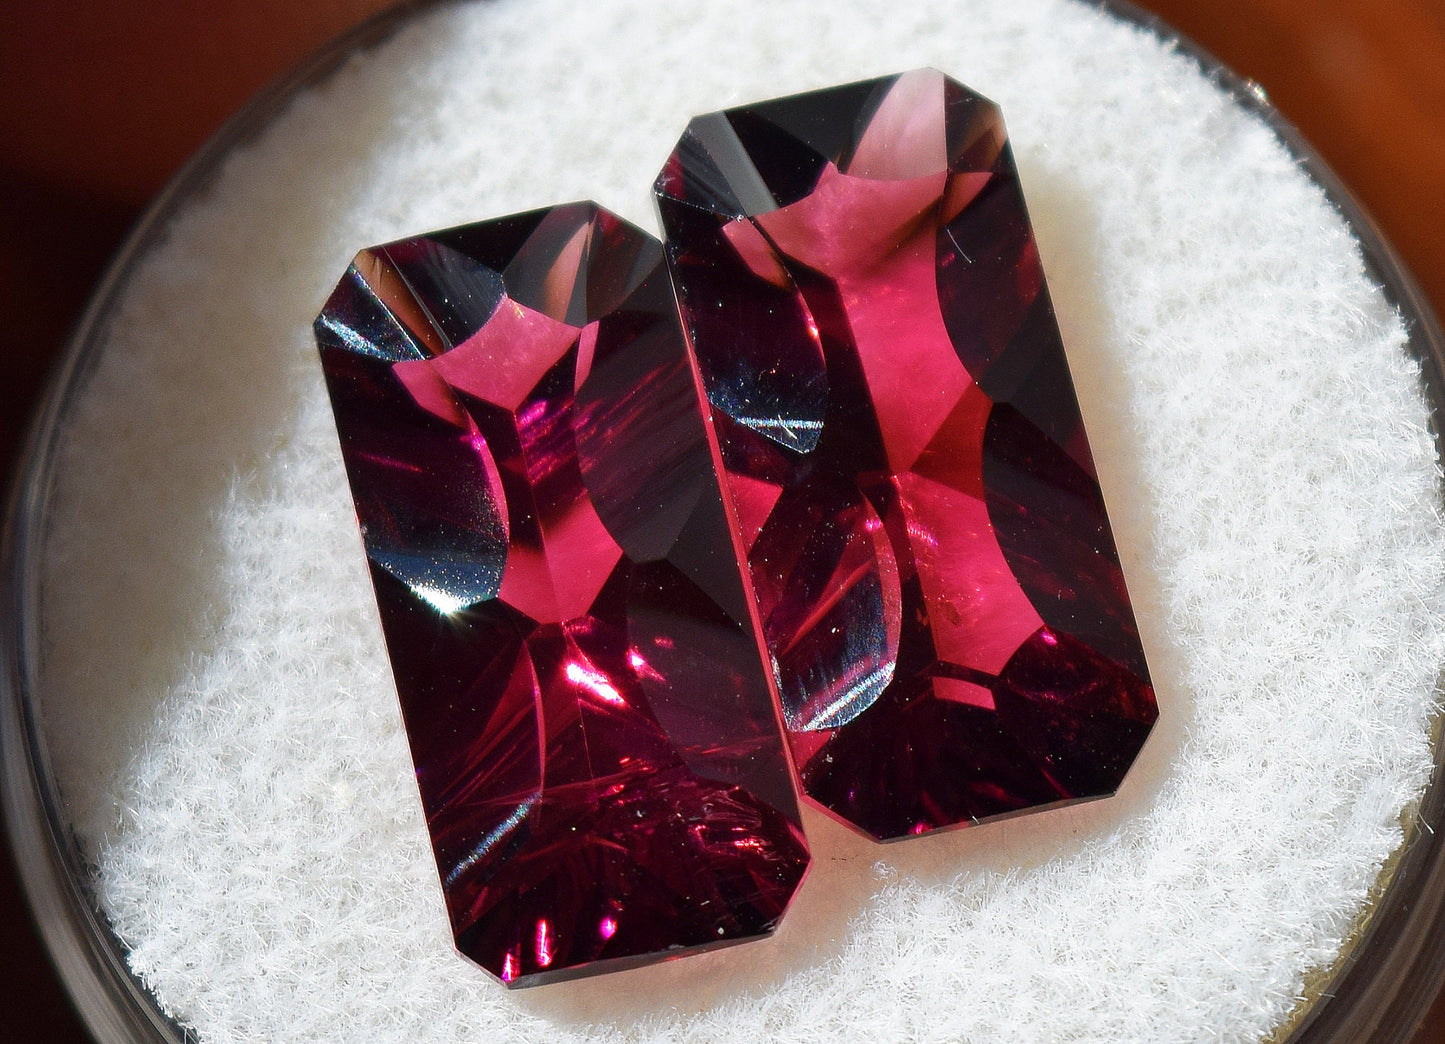 Rare matched set of Nigerian Rubellite (red Tourmaline) stones for earrings.  7.34 carats total weight of tourmaline heaven!